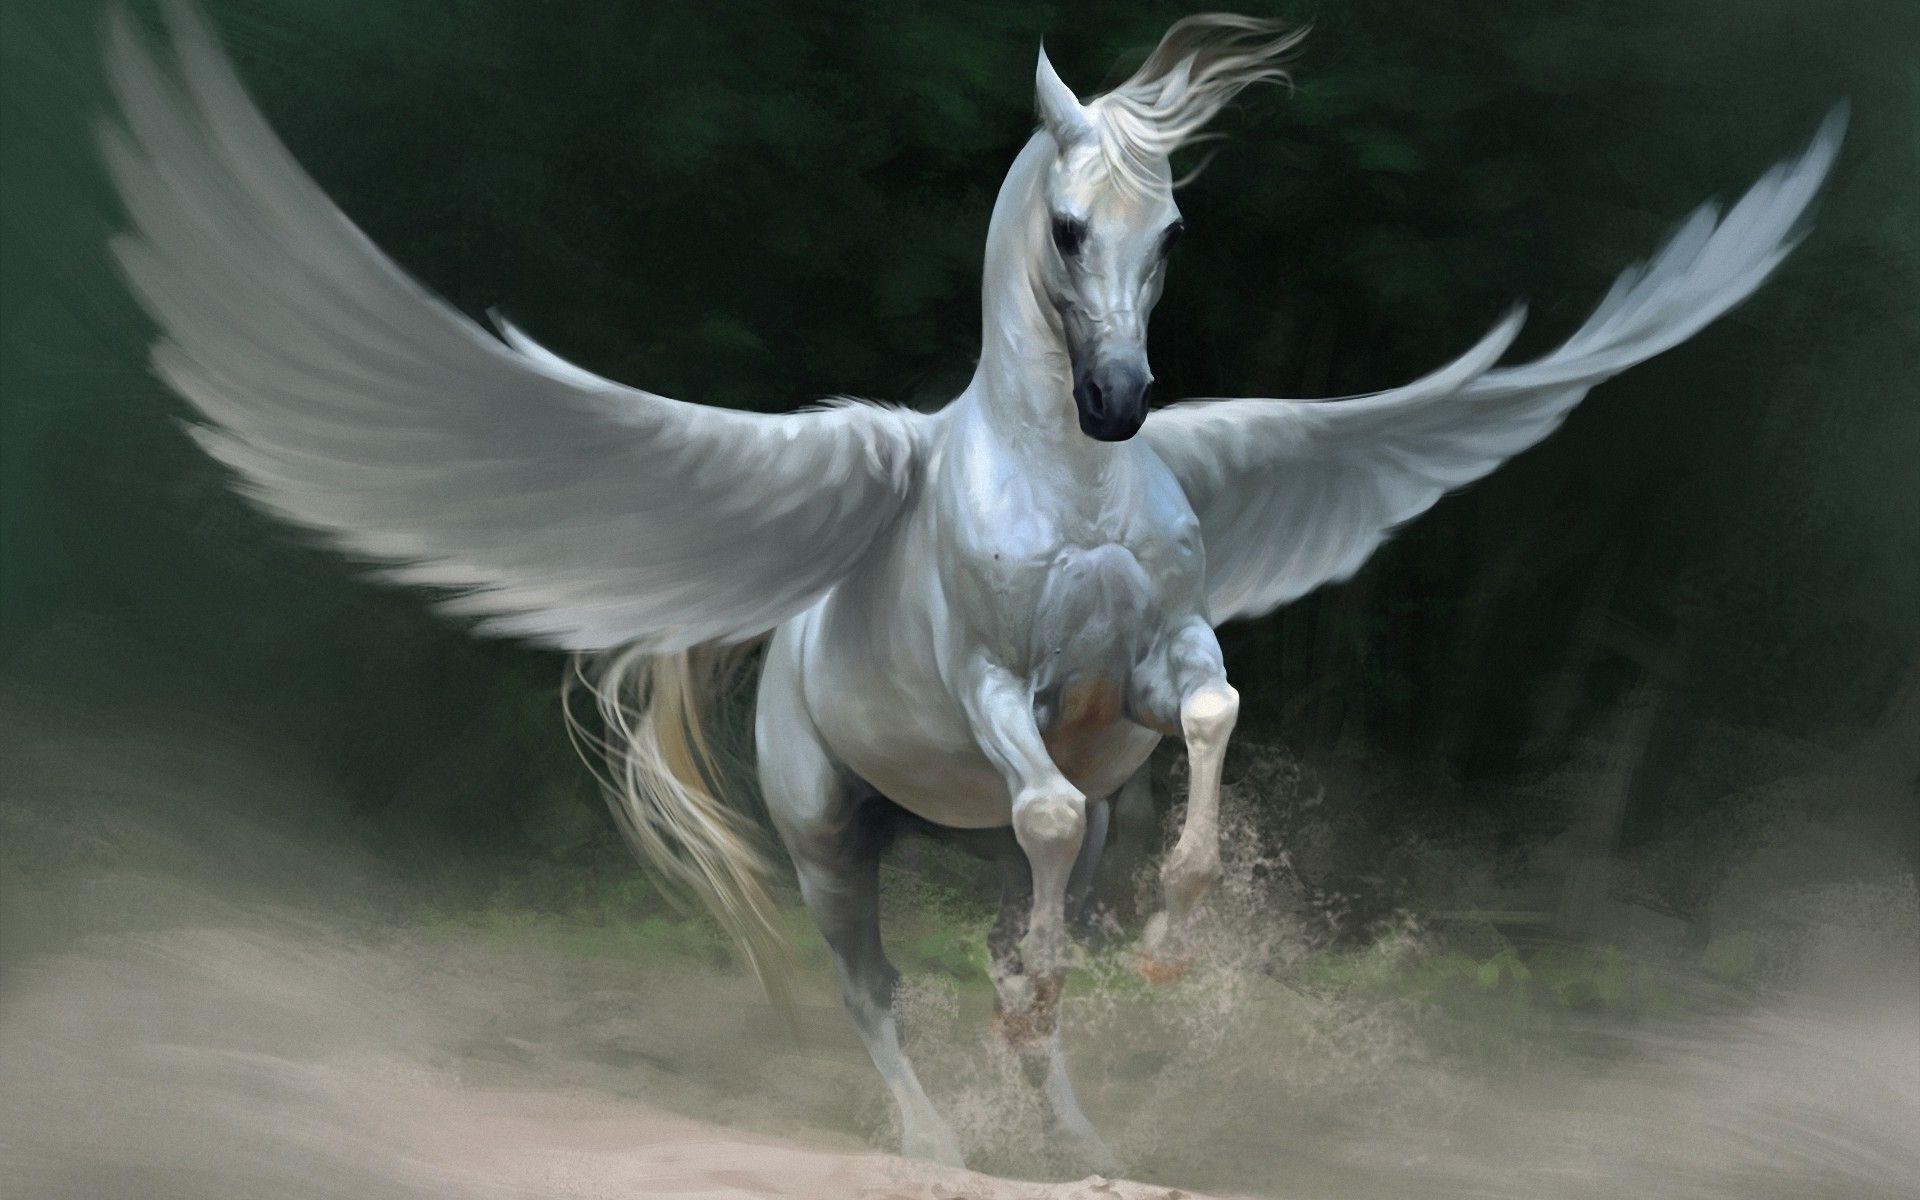 Pegasus horse Wallpaper Picture Photo Image. In my sleep